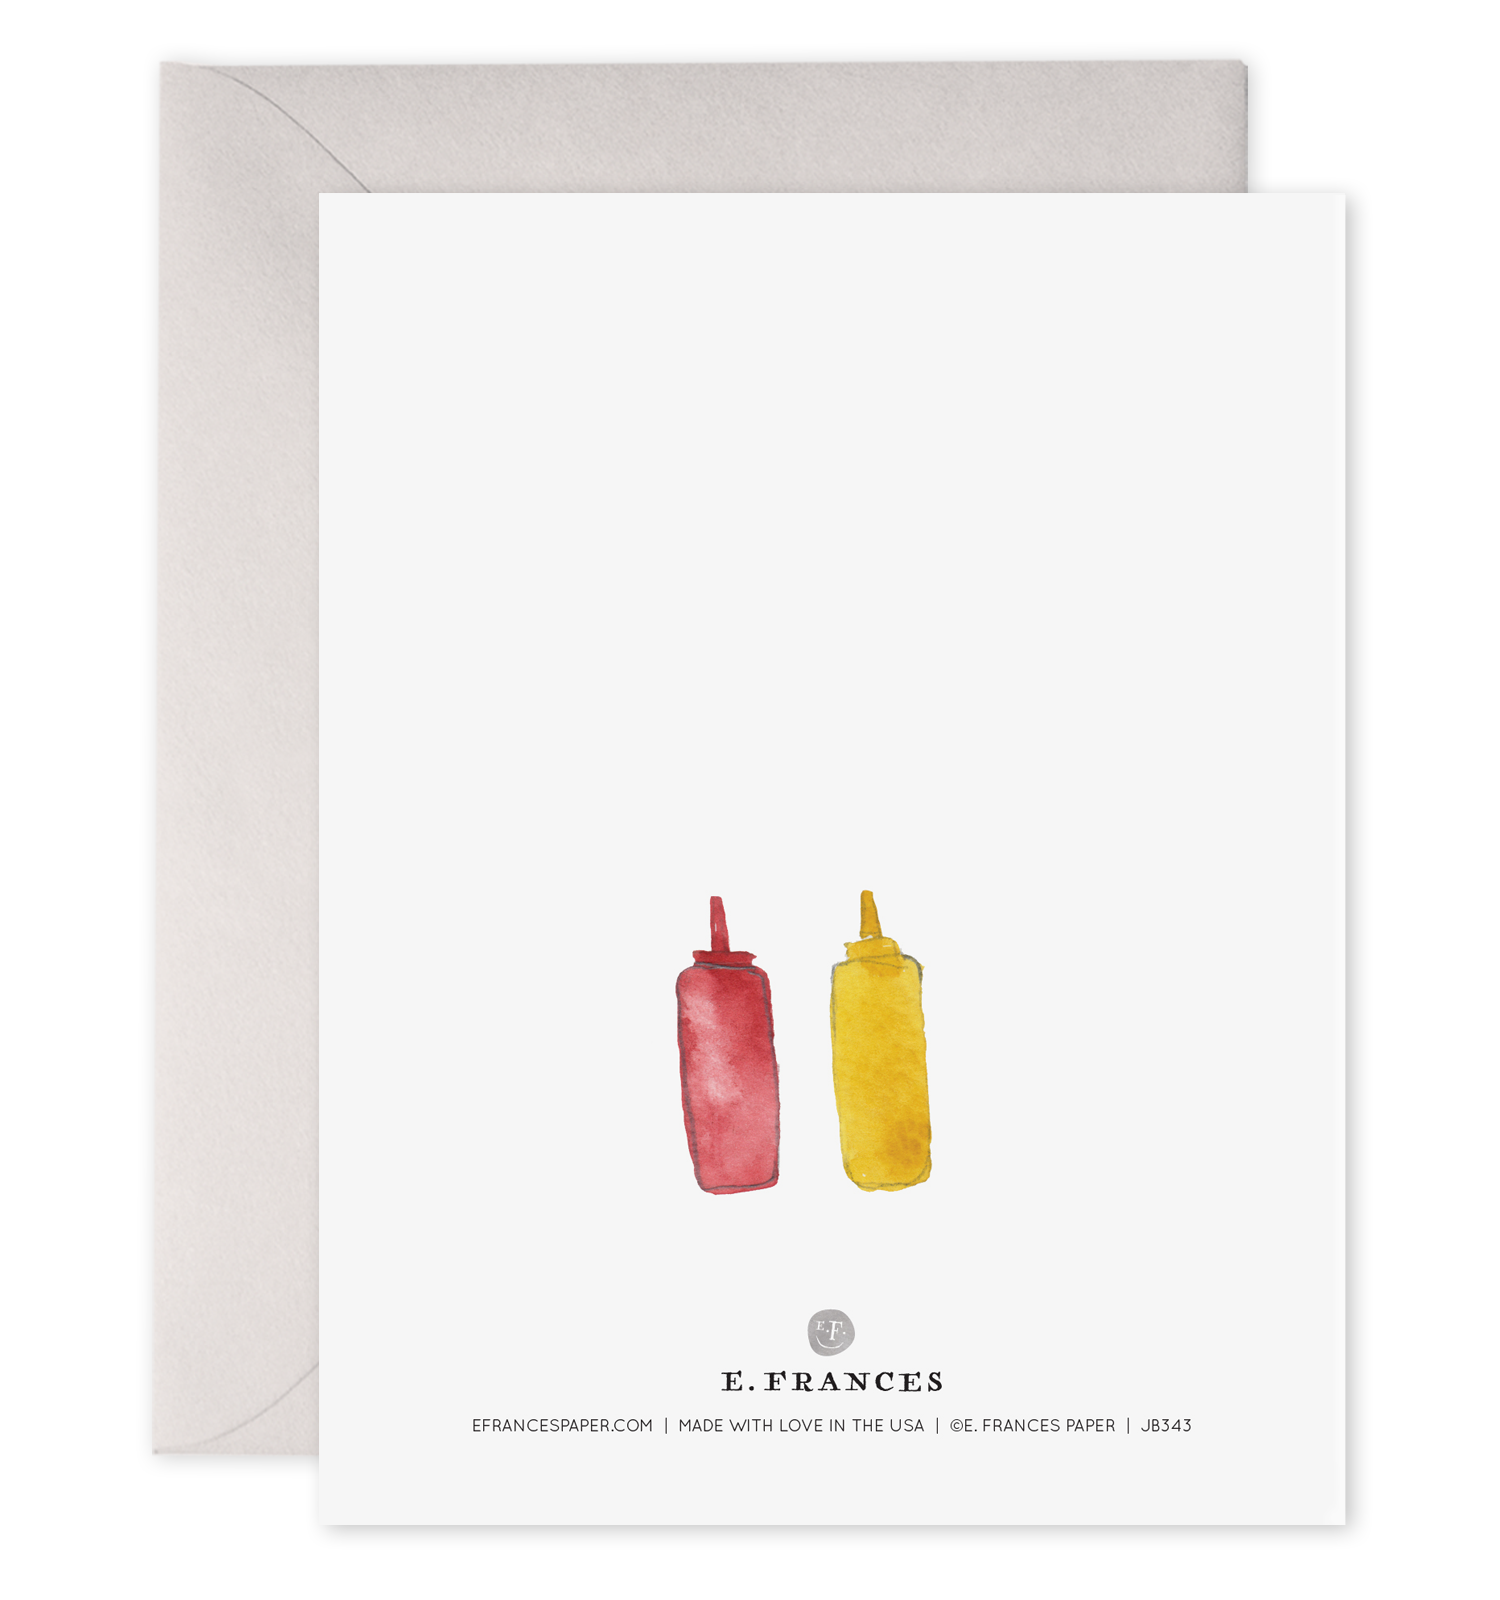 A Nice Buns Greeting Card with an illustration of hot dogs in buns by E. Frances.